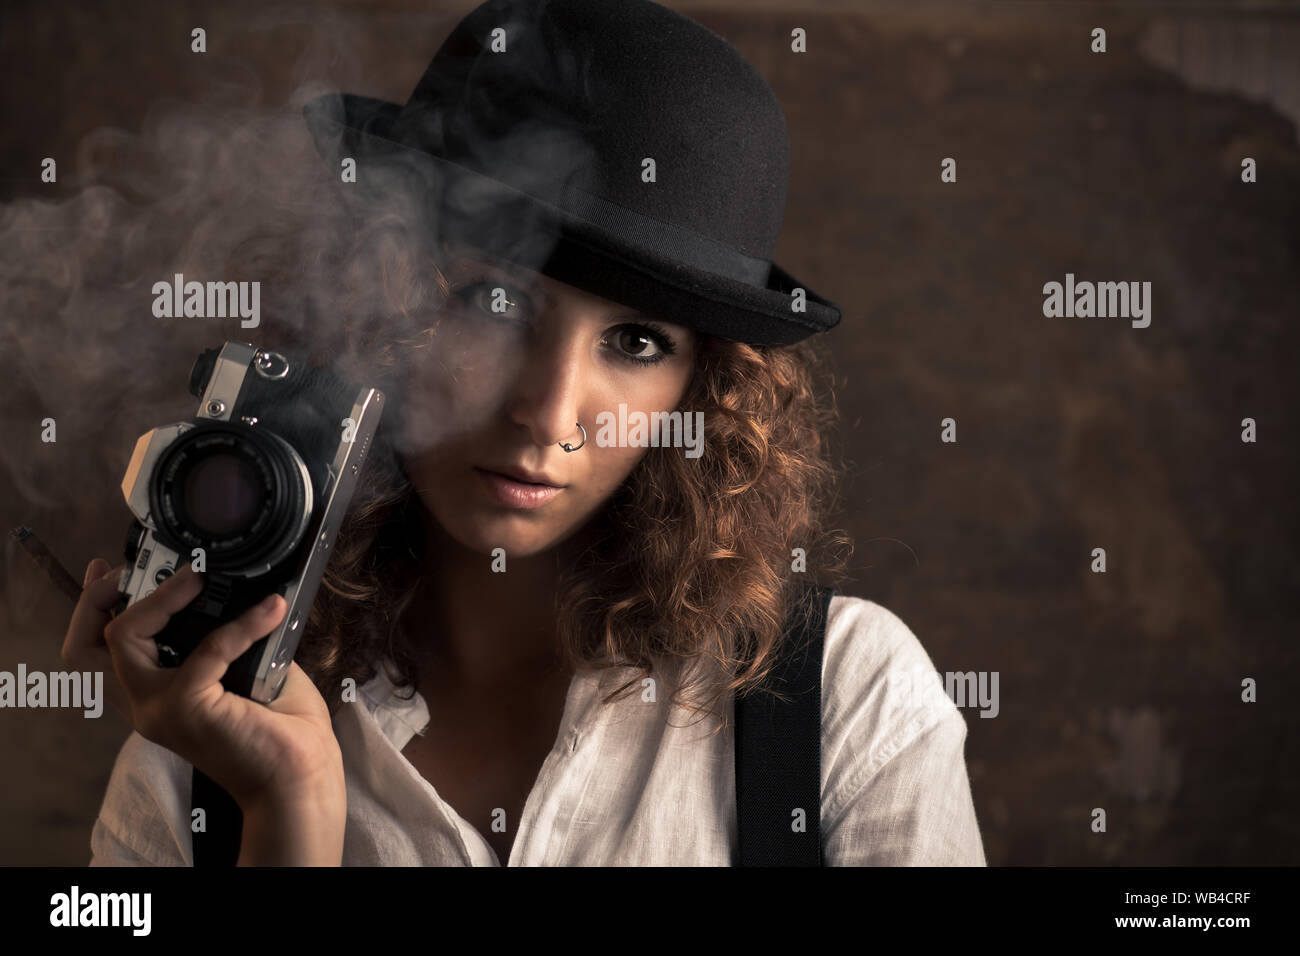 Woman Photographer with Bowler and Suspenders Holding a Cigar Stock Photo